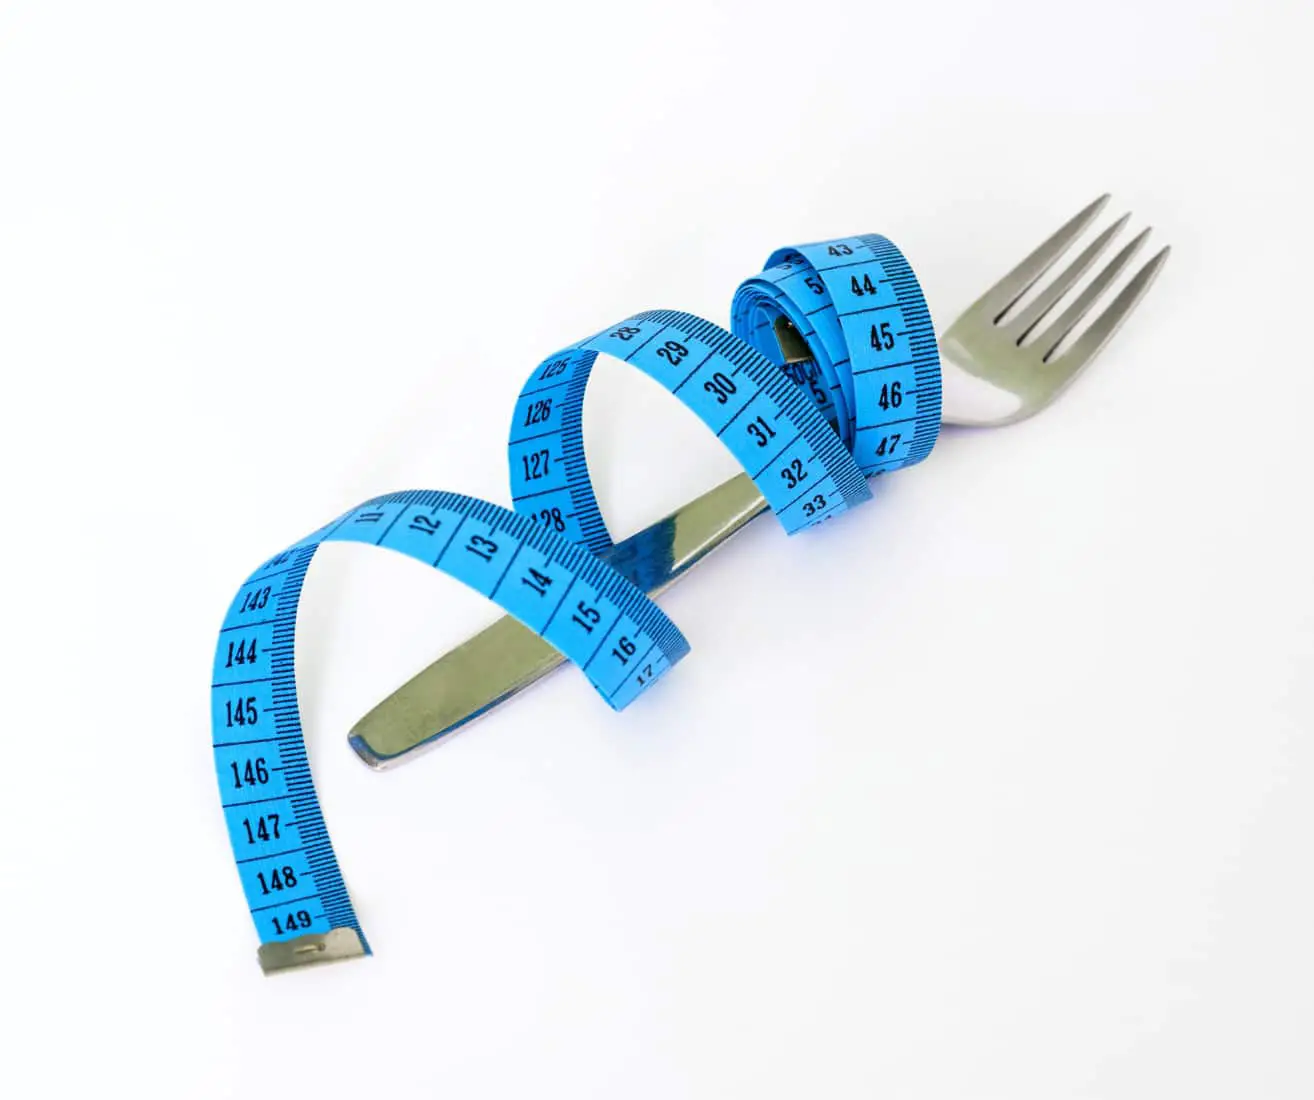 Intermittent Fasting: What Is It? Should You Do It?